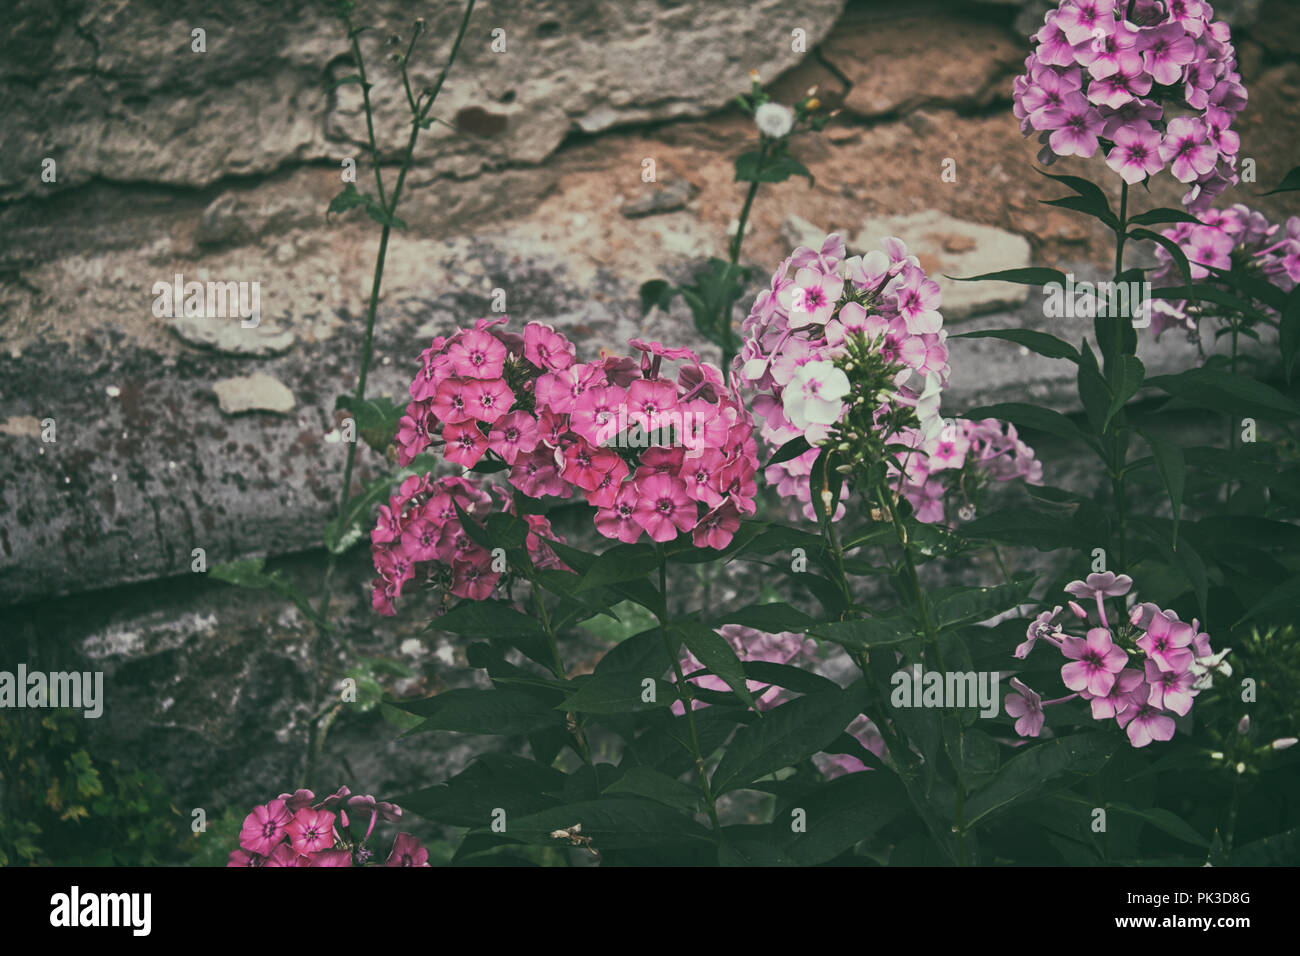 Pink flowers of Phlox and grunge wall. Phlox flowers. Garden flowers. Stock Photo